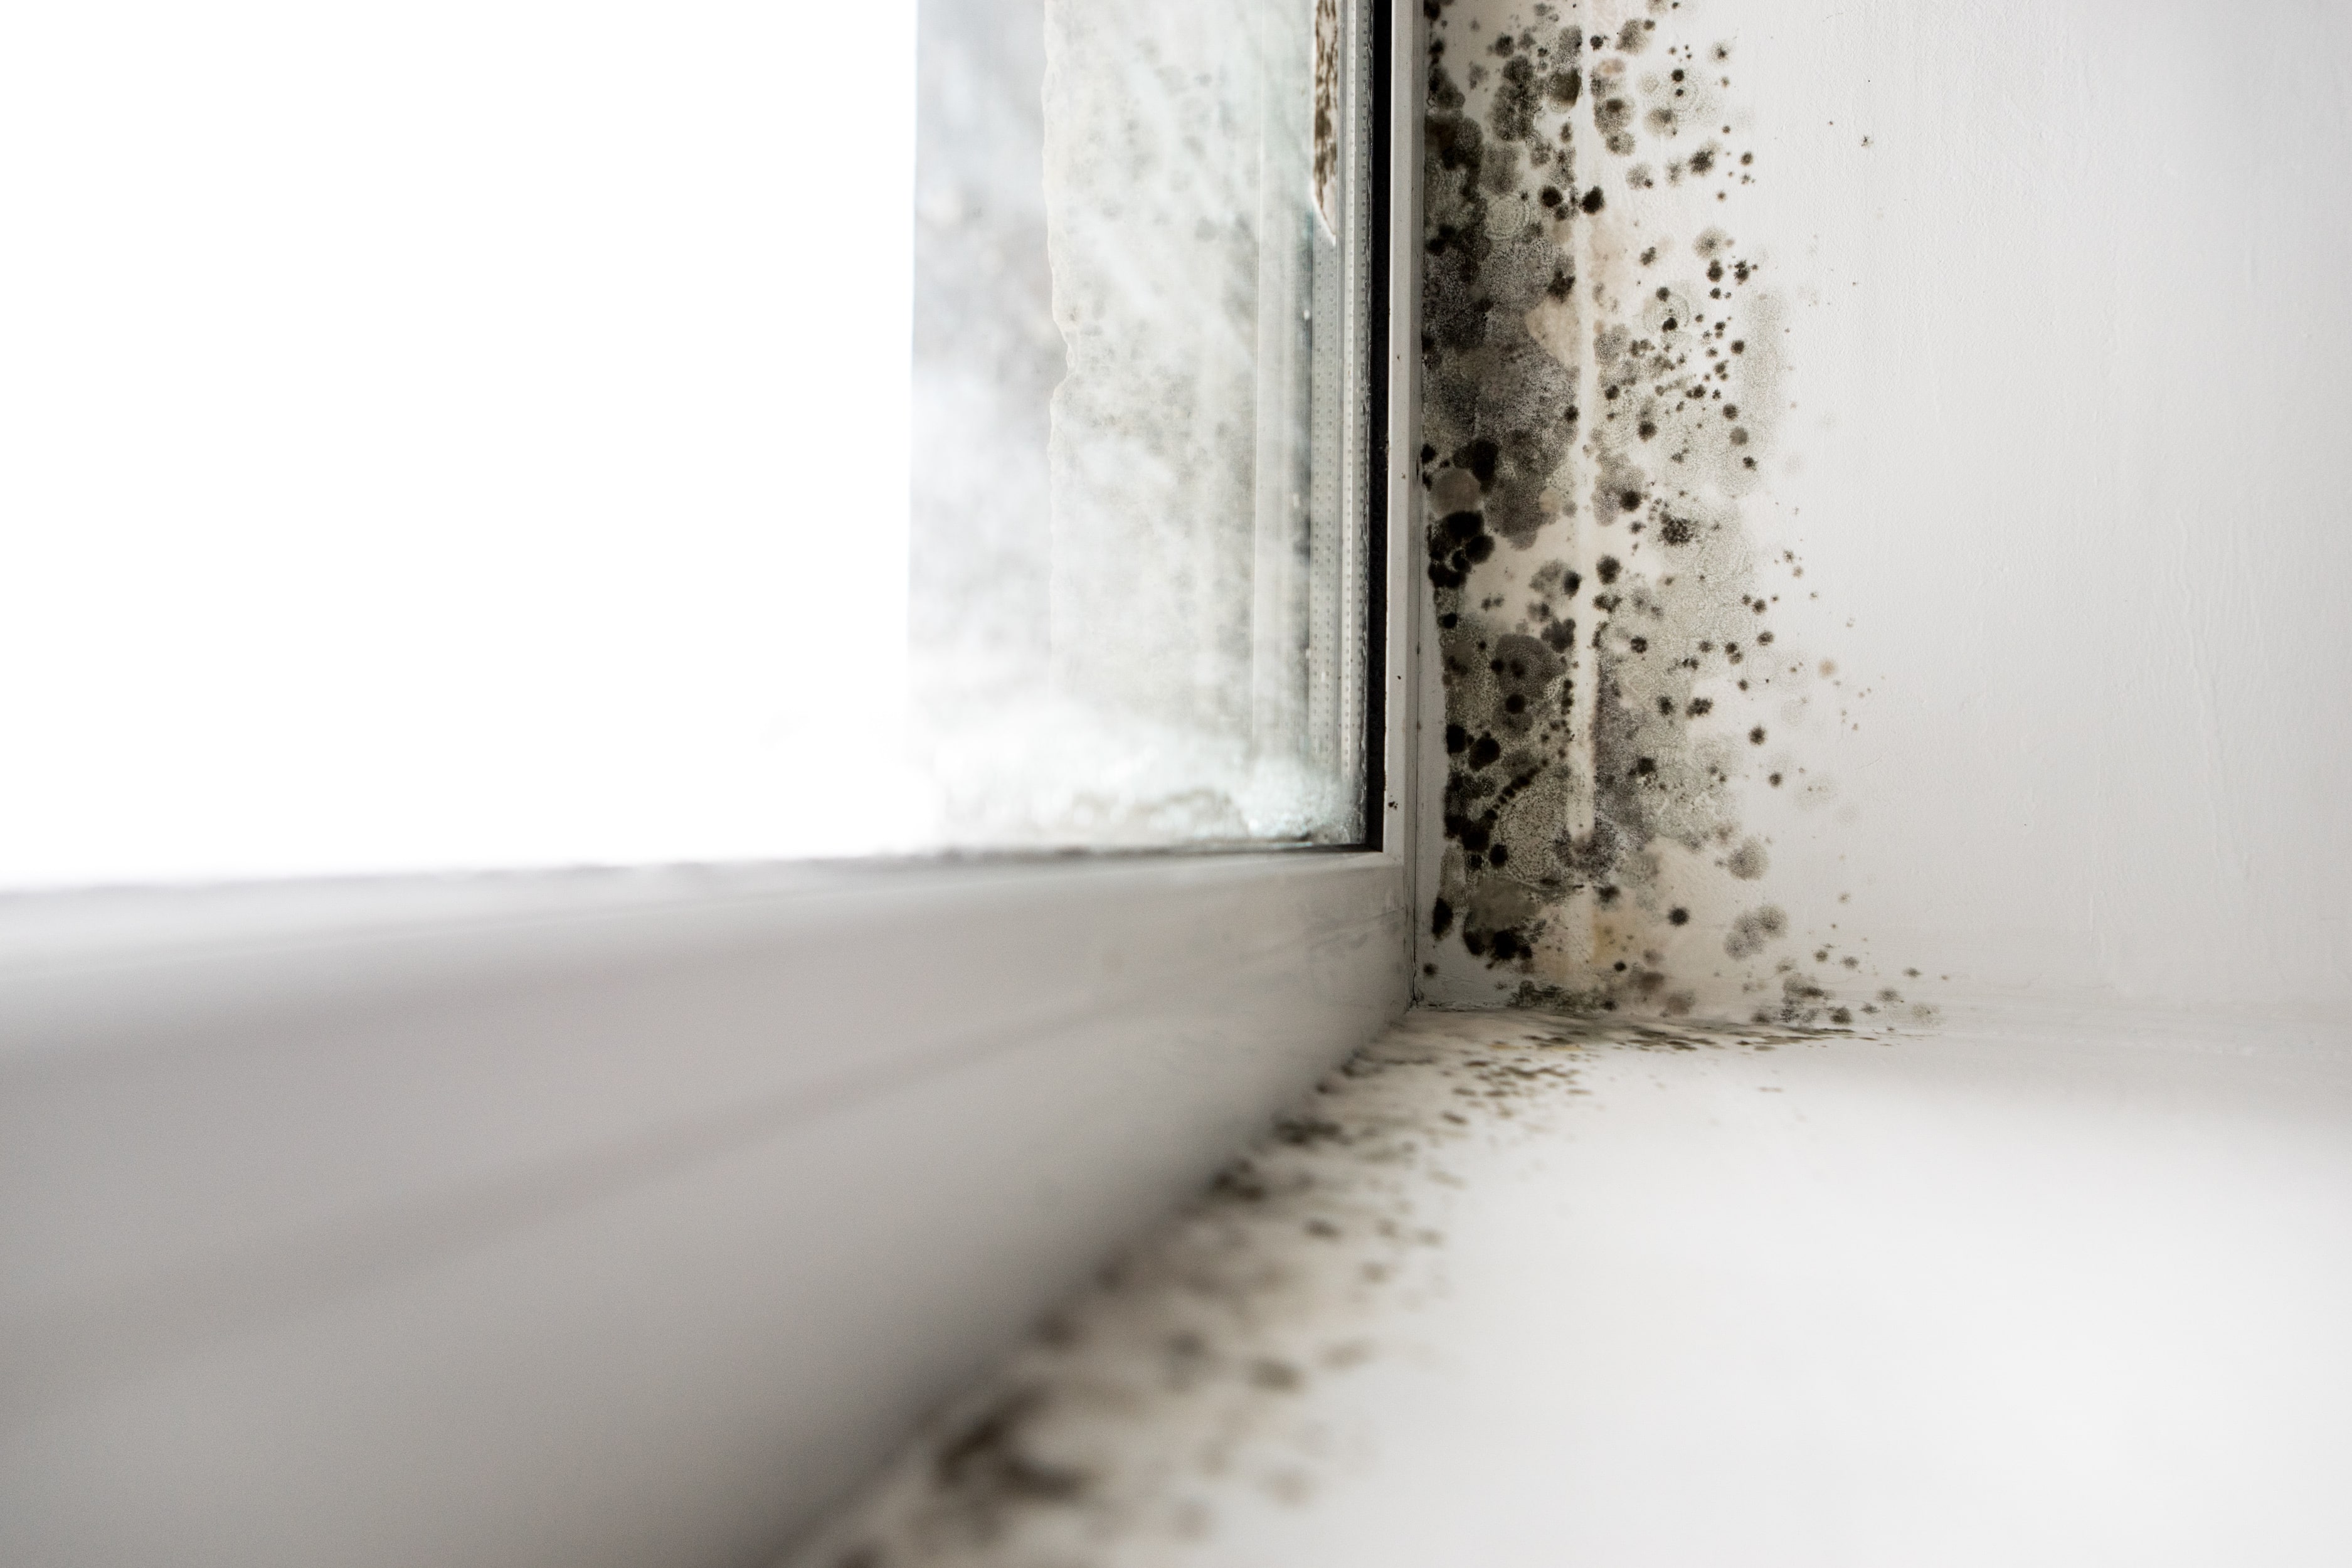 A corner of an interior window sill speckled with black mould.